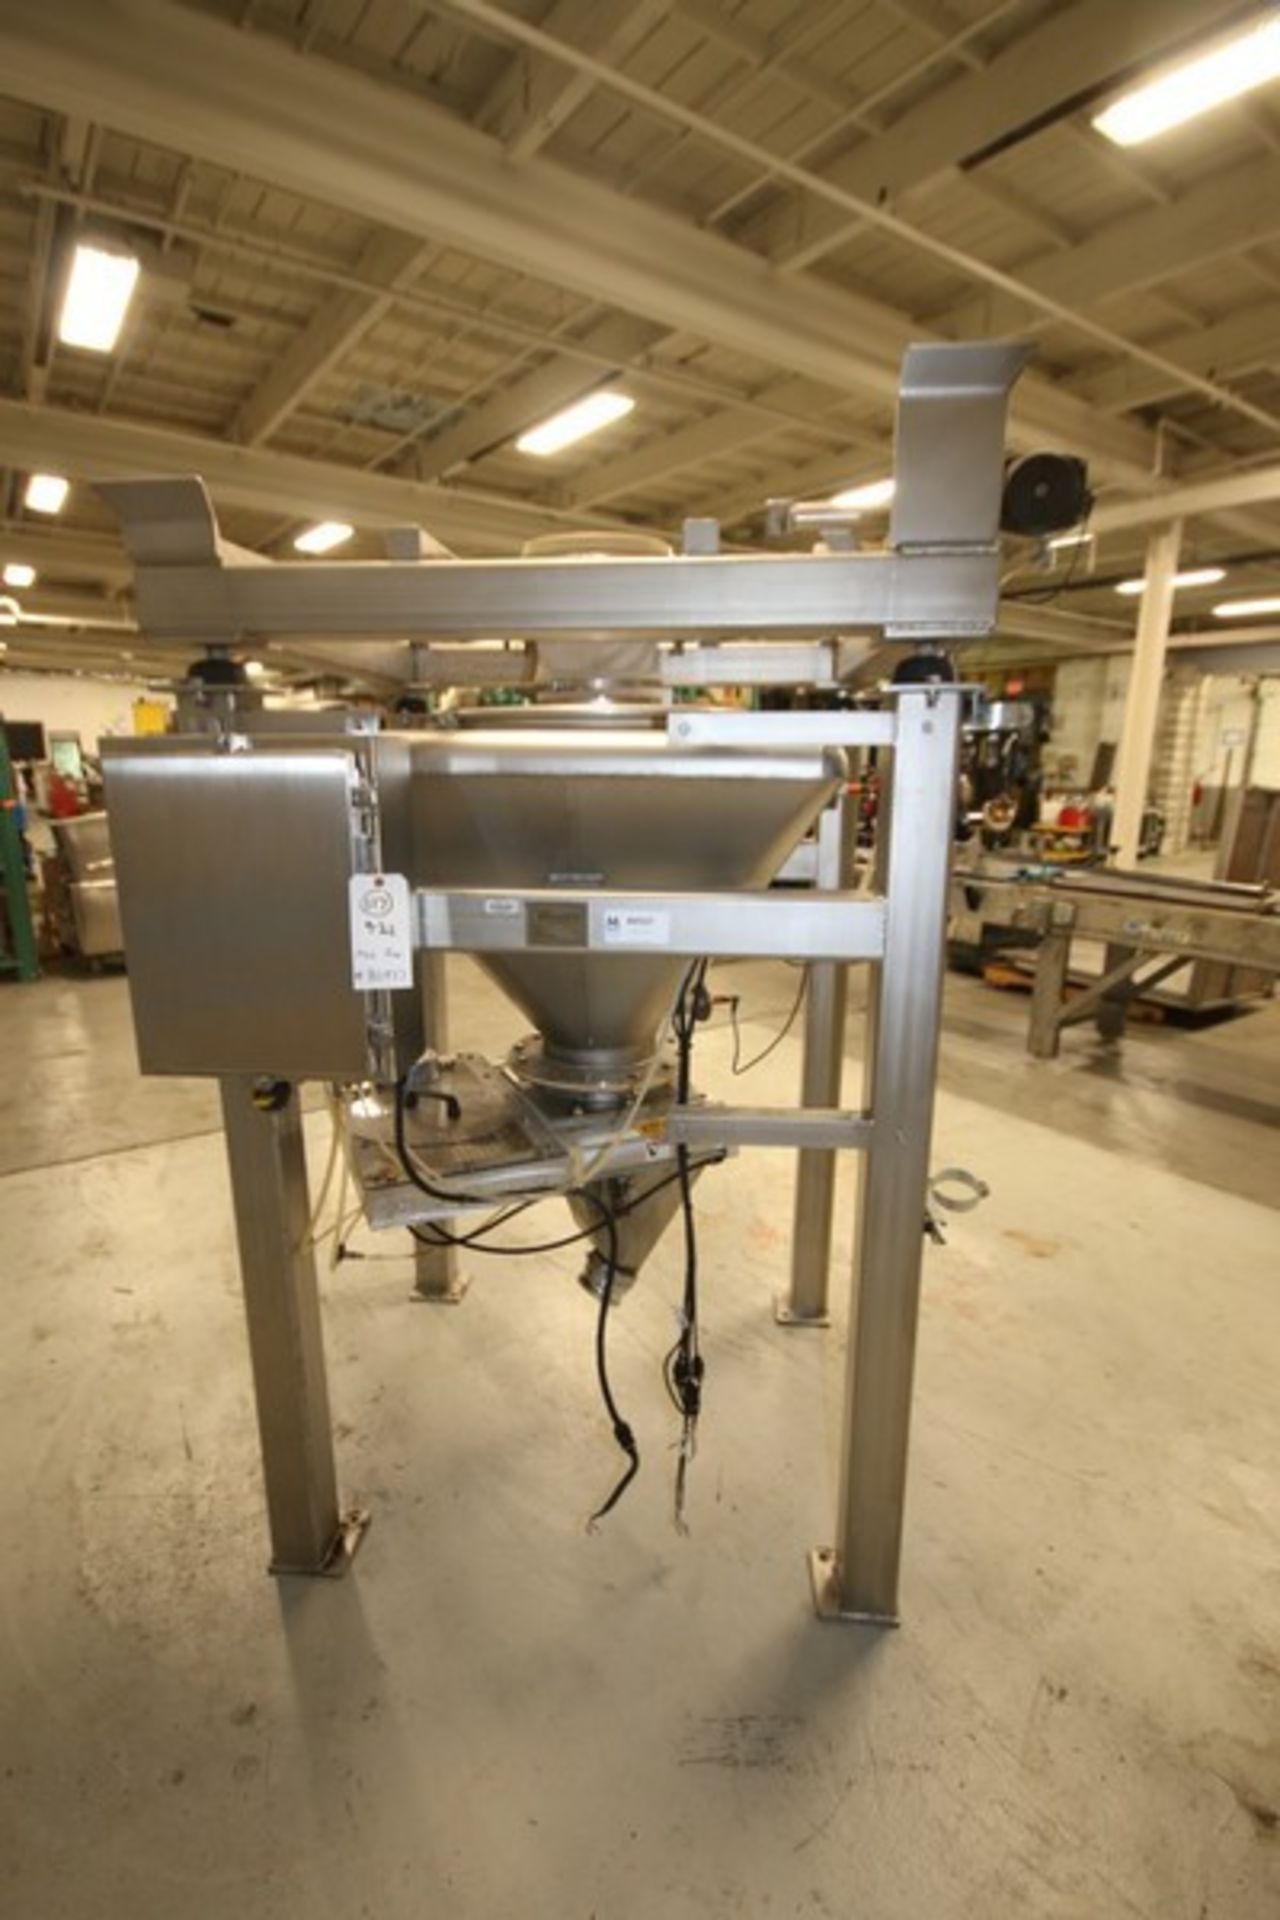 Metalcraft S/S Powder Hopper, Model 1144500,SN 44115-3, with 10" Top Connection with Pneumatic Power - Image 3 of 7